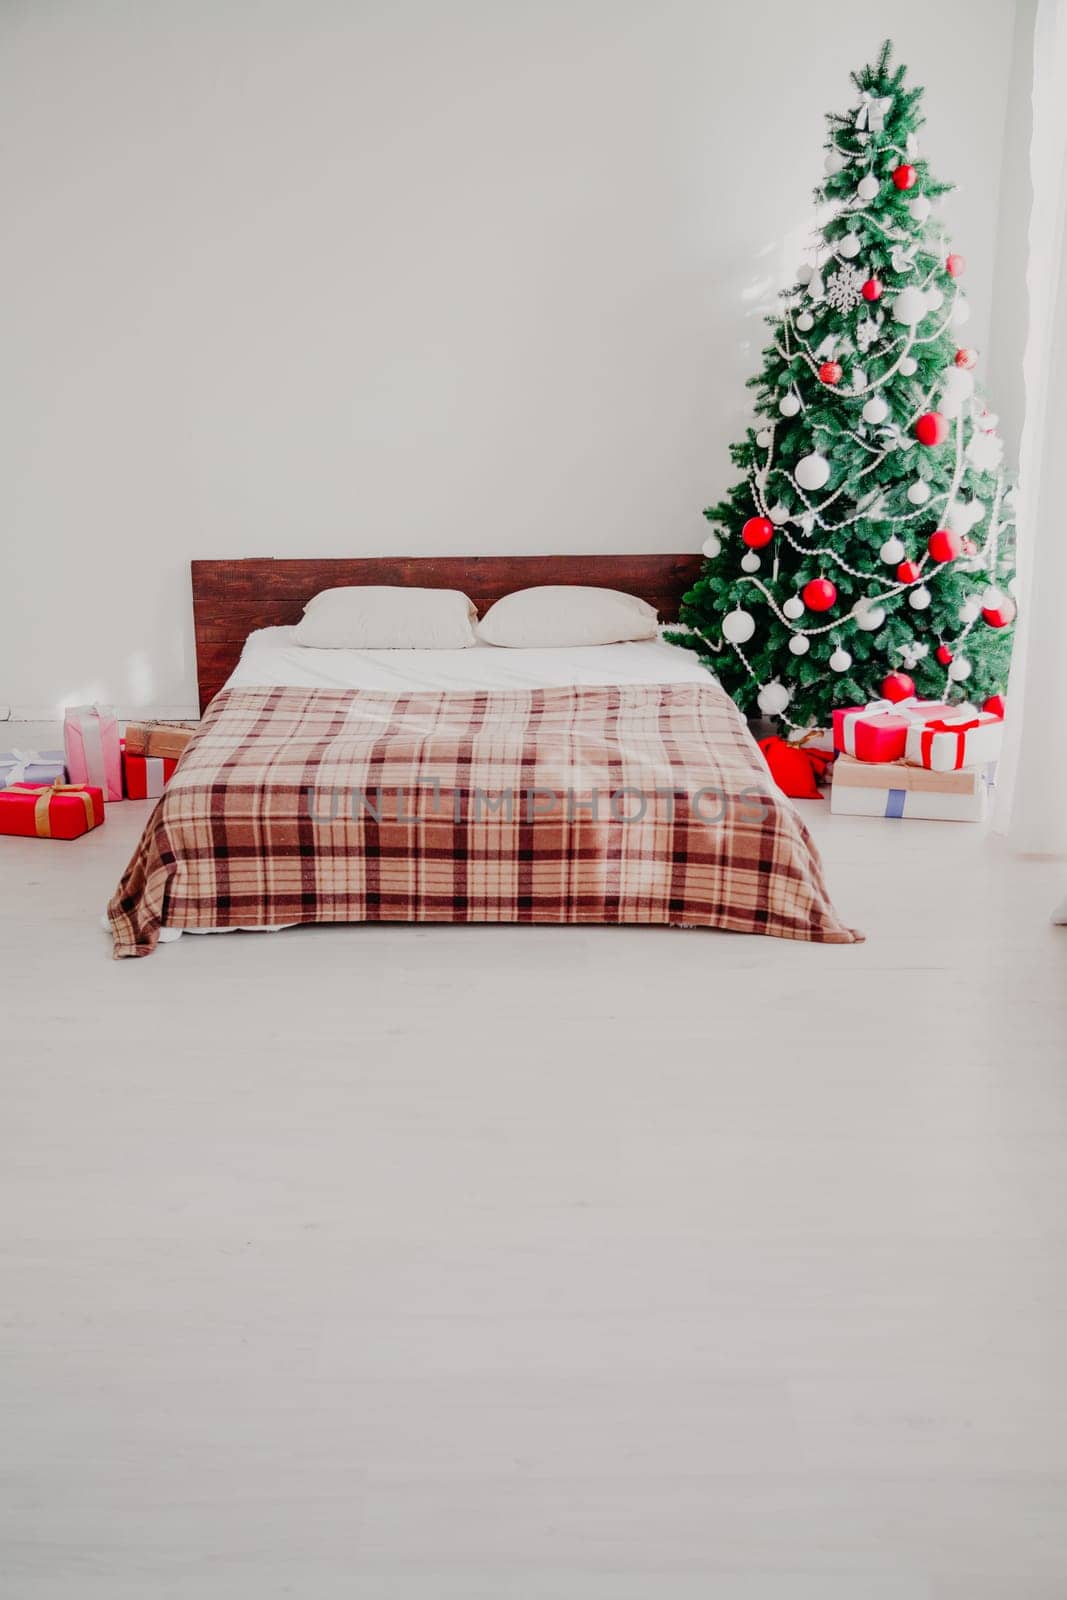 Interior bedroom with bed and Christmas tree new year holidays